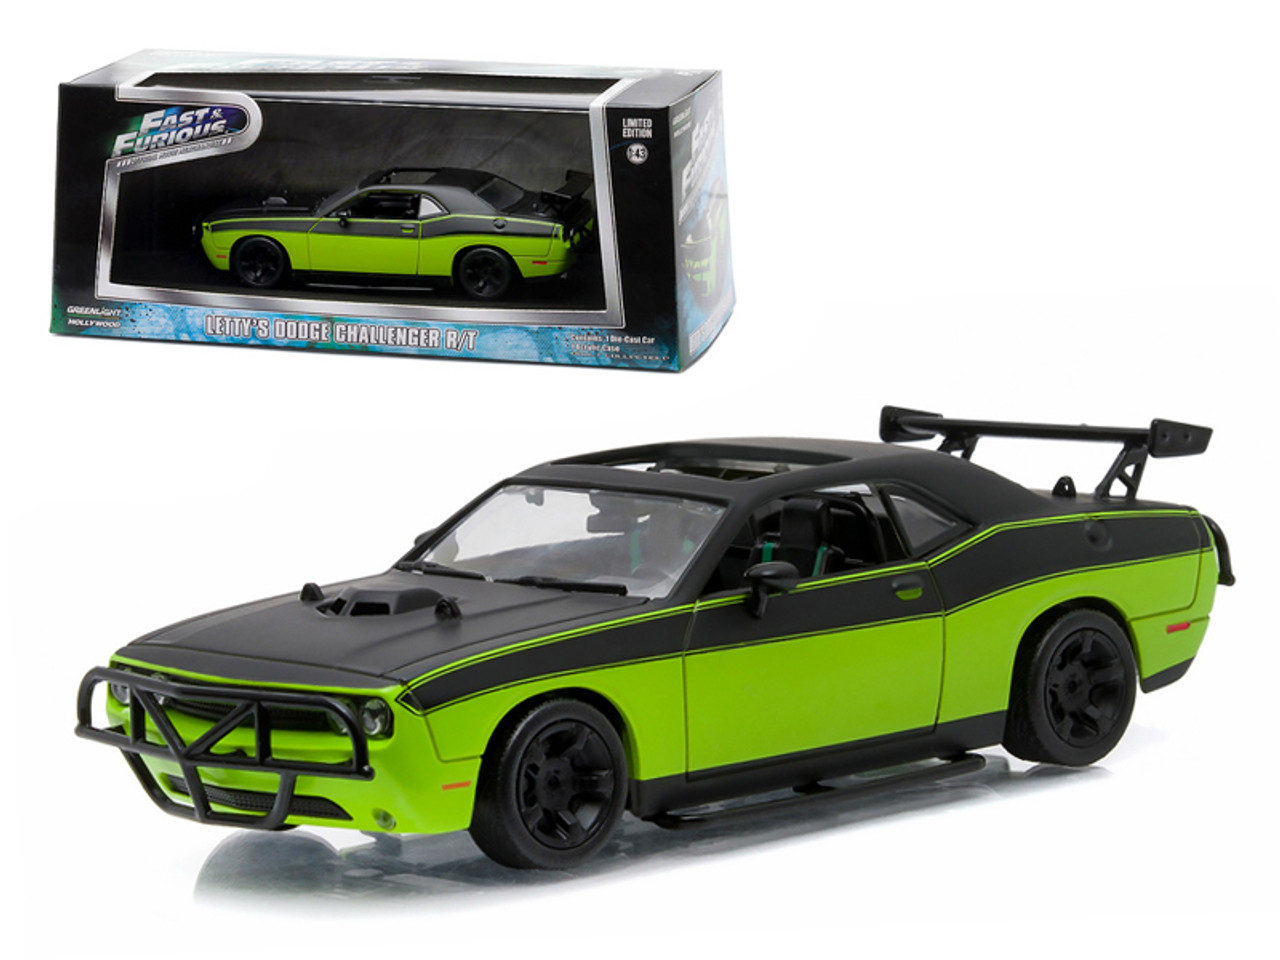 Letty's 2014 Dodge Challenger SRT-8 "Fast and Furious-Fast 7" Movie (2014) 1/43 Diecast Model Car by Greenlight